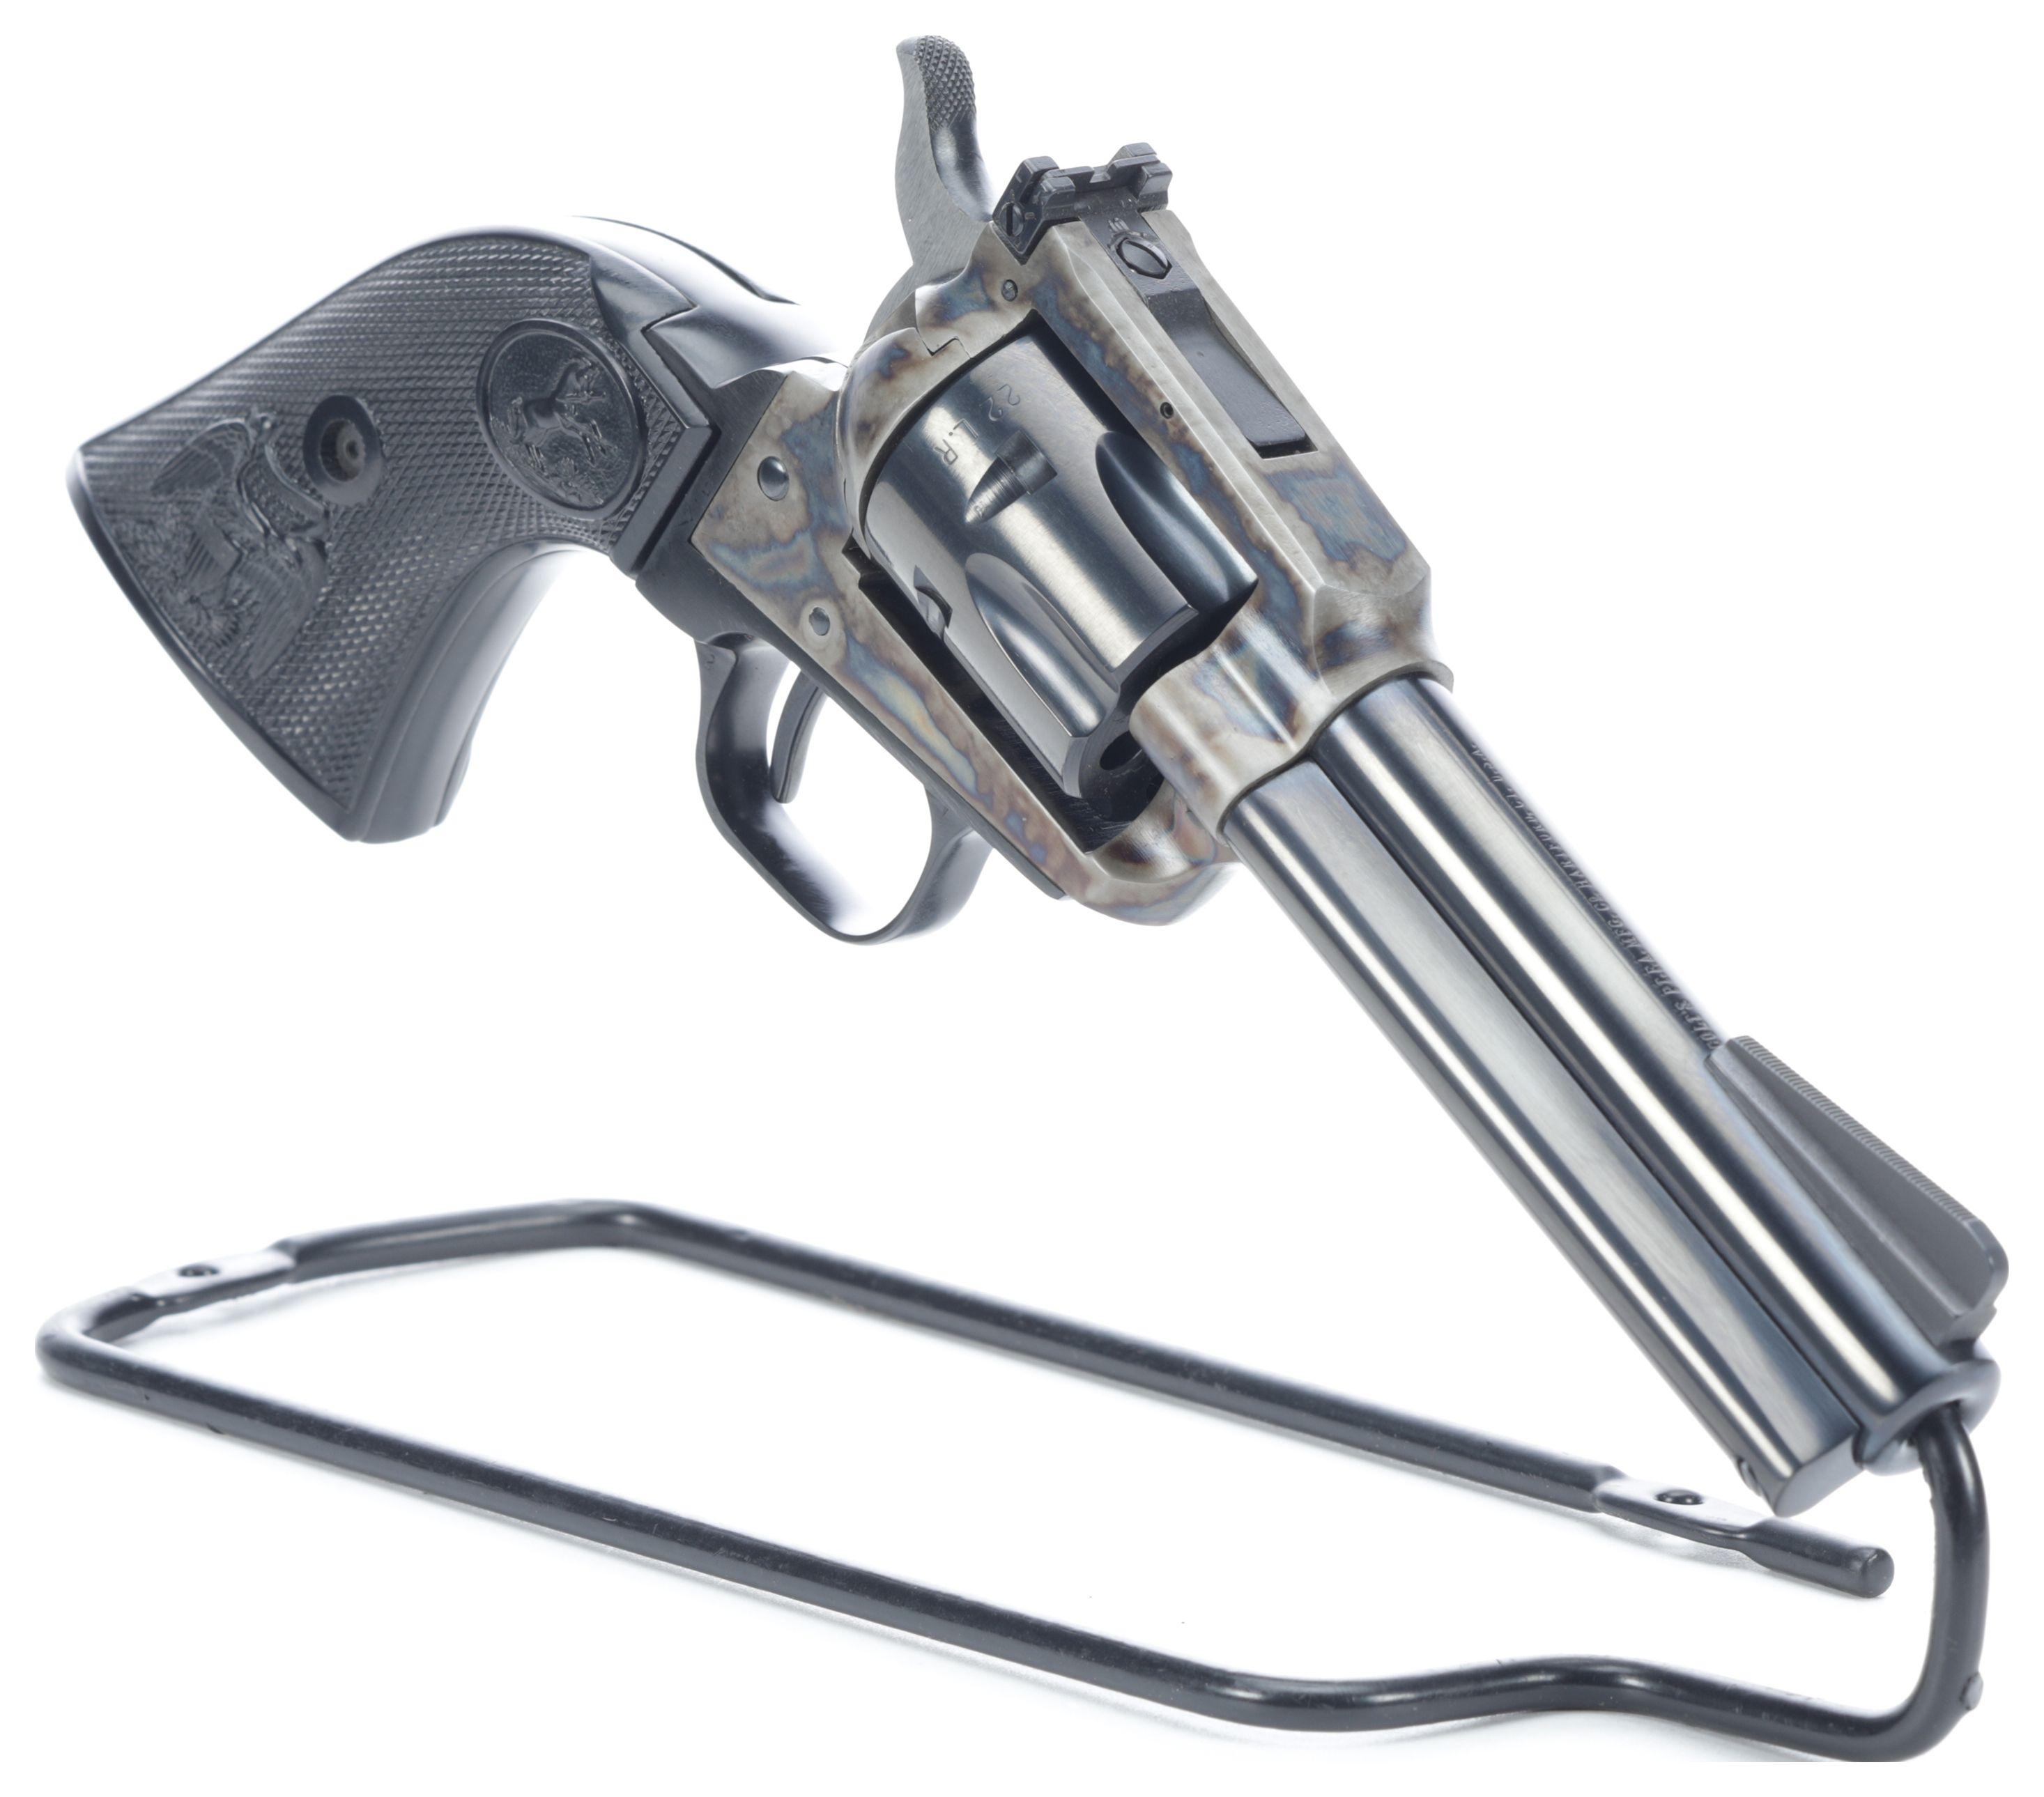 Colt New Frontier Model Single Action Revolver with Box